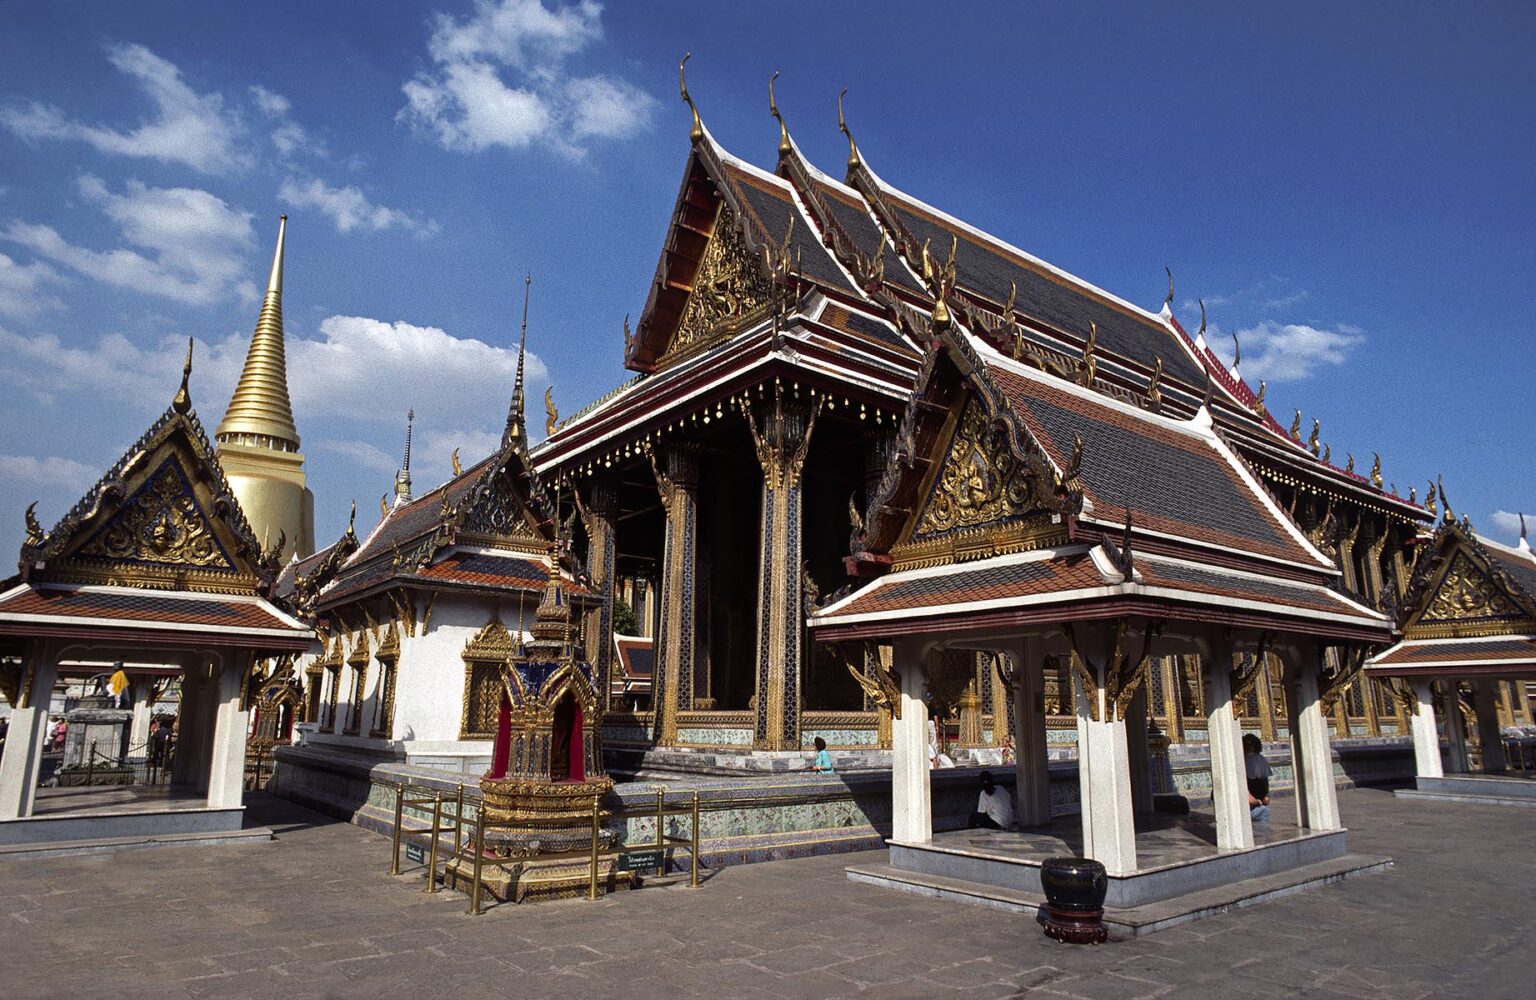 The TEMPLE OF THE EMERALD BUDDHA of WAT PHRA KEO which is part of the GRAND PALACE complex - BANGKOK, THAILAND